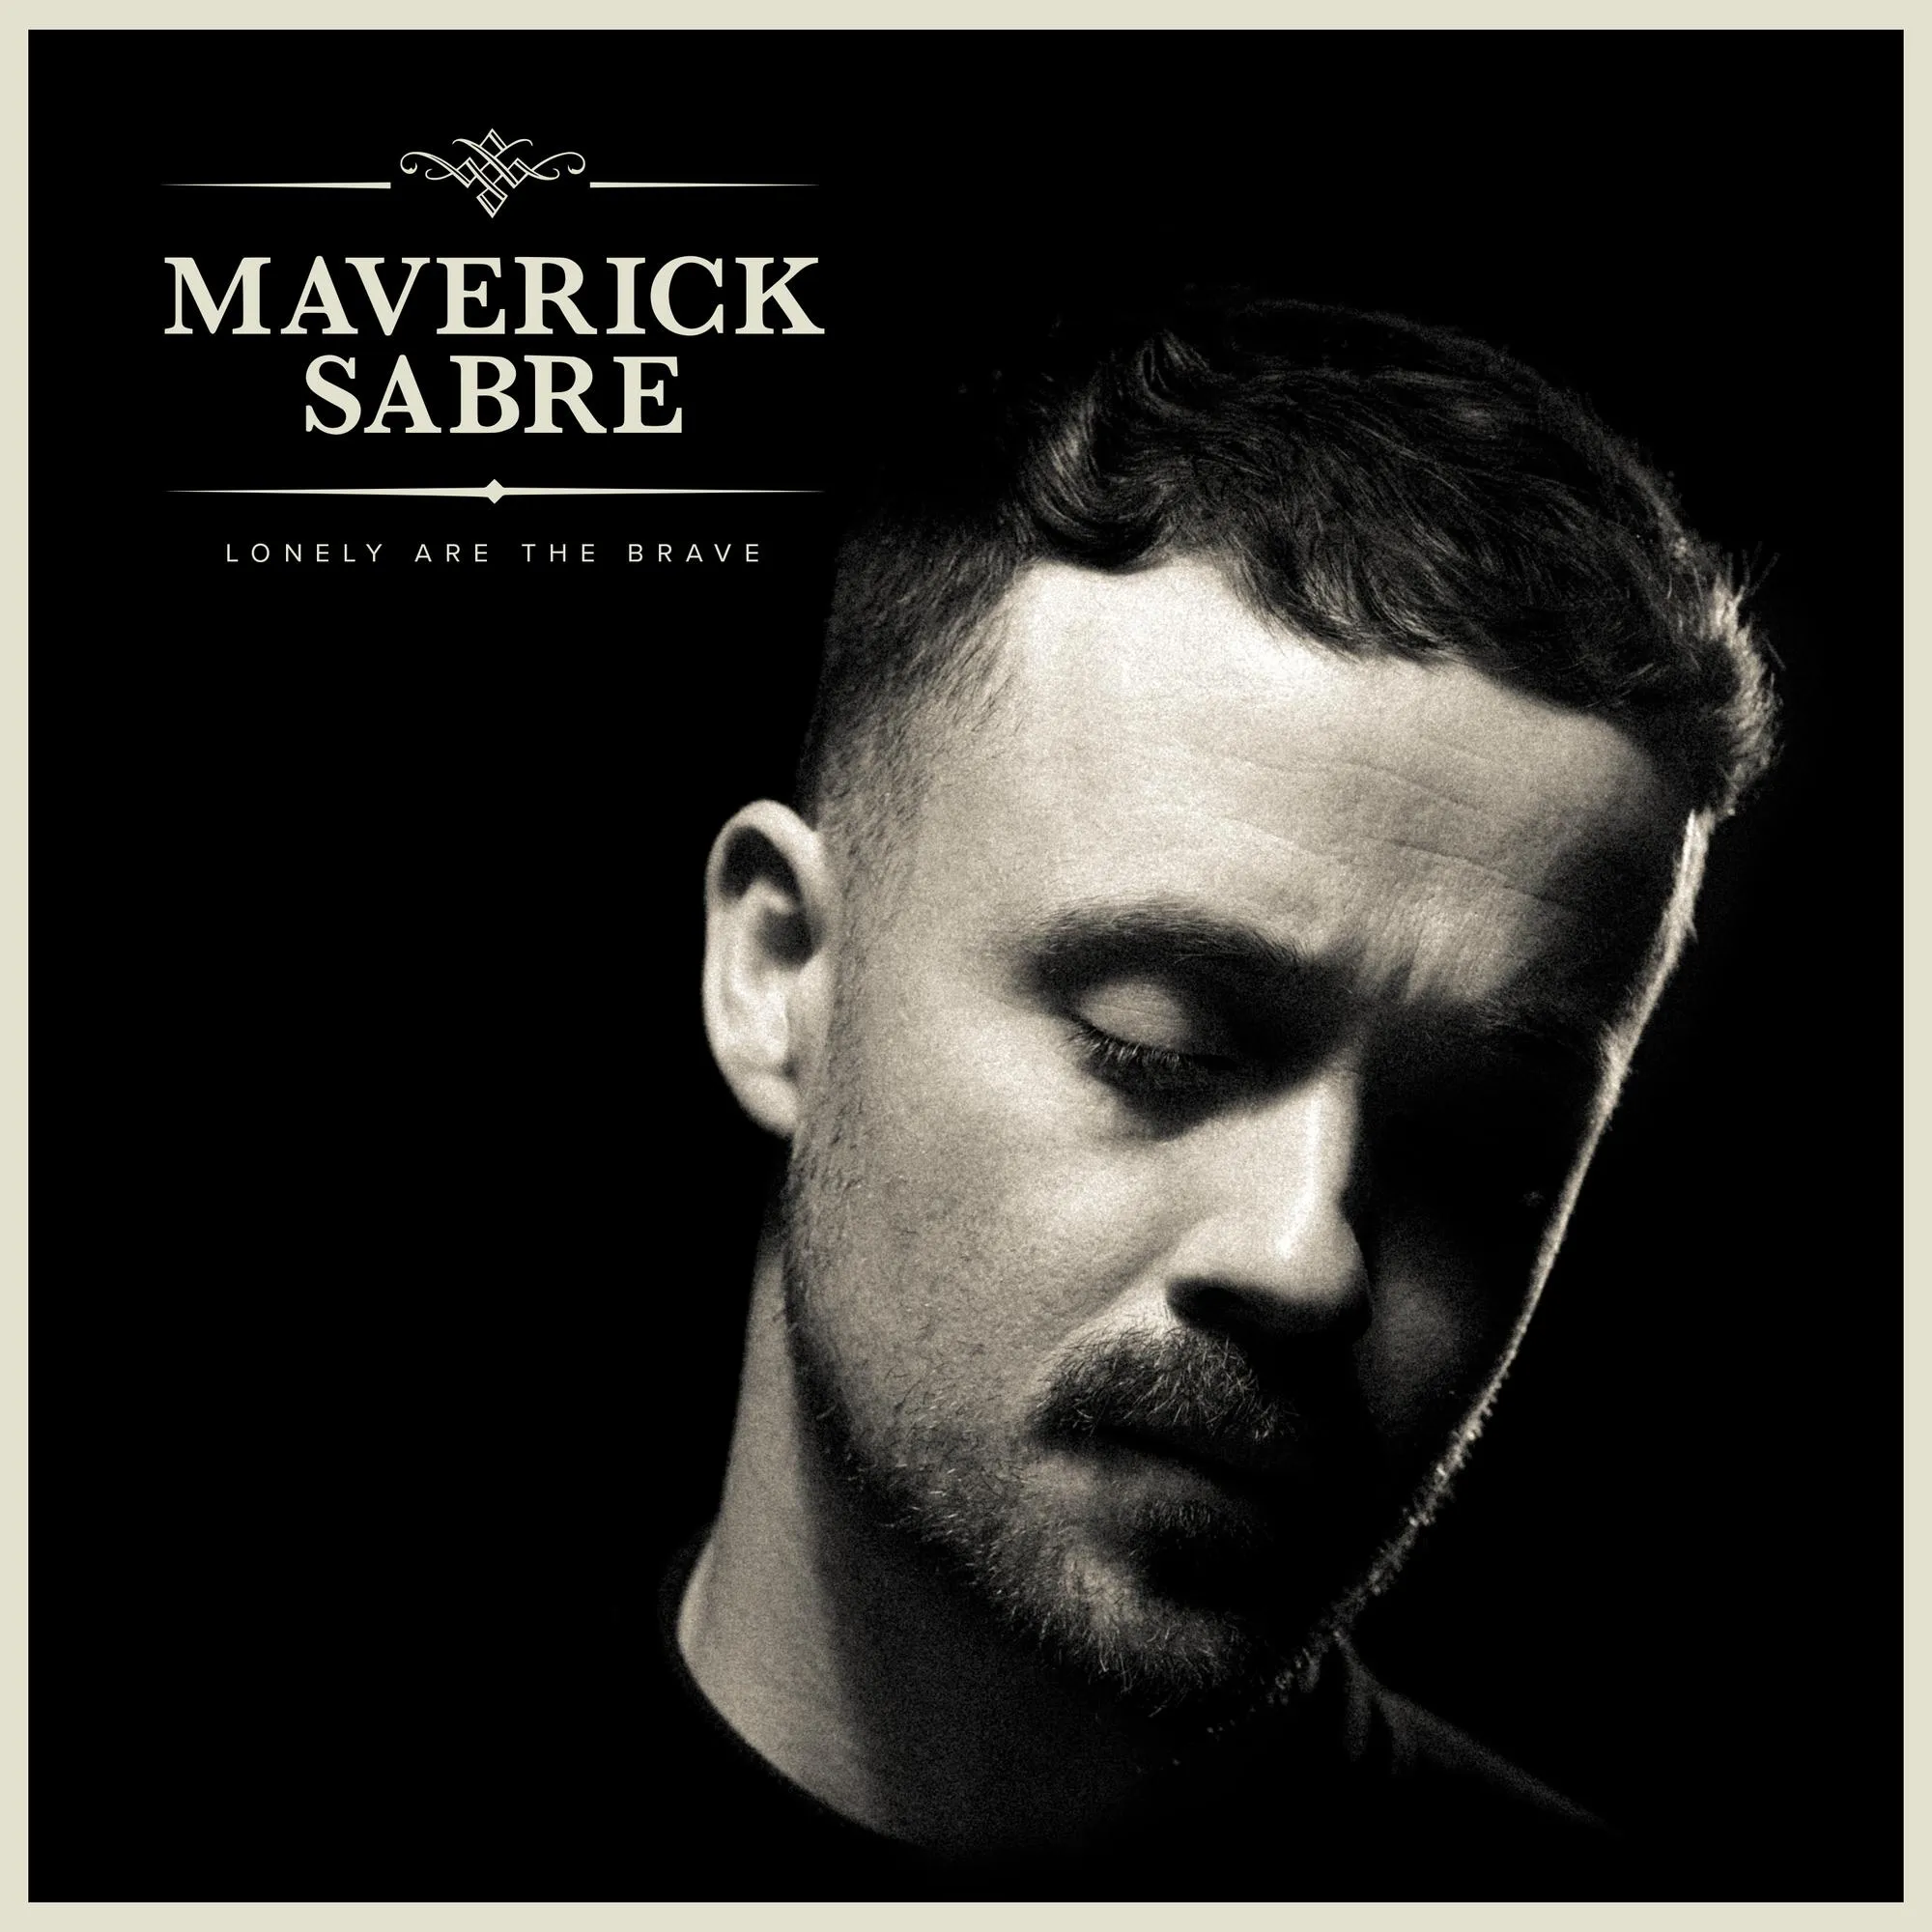 <strong>Maverick Sabre - Lonely Are The Brave (Mav's Version)</strong> (Vinyl LP - black)